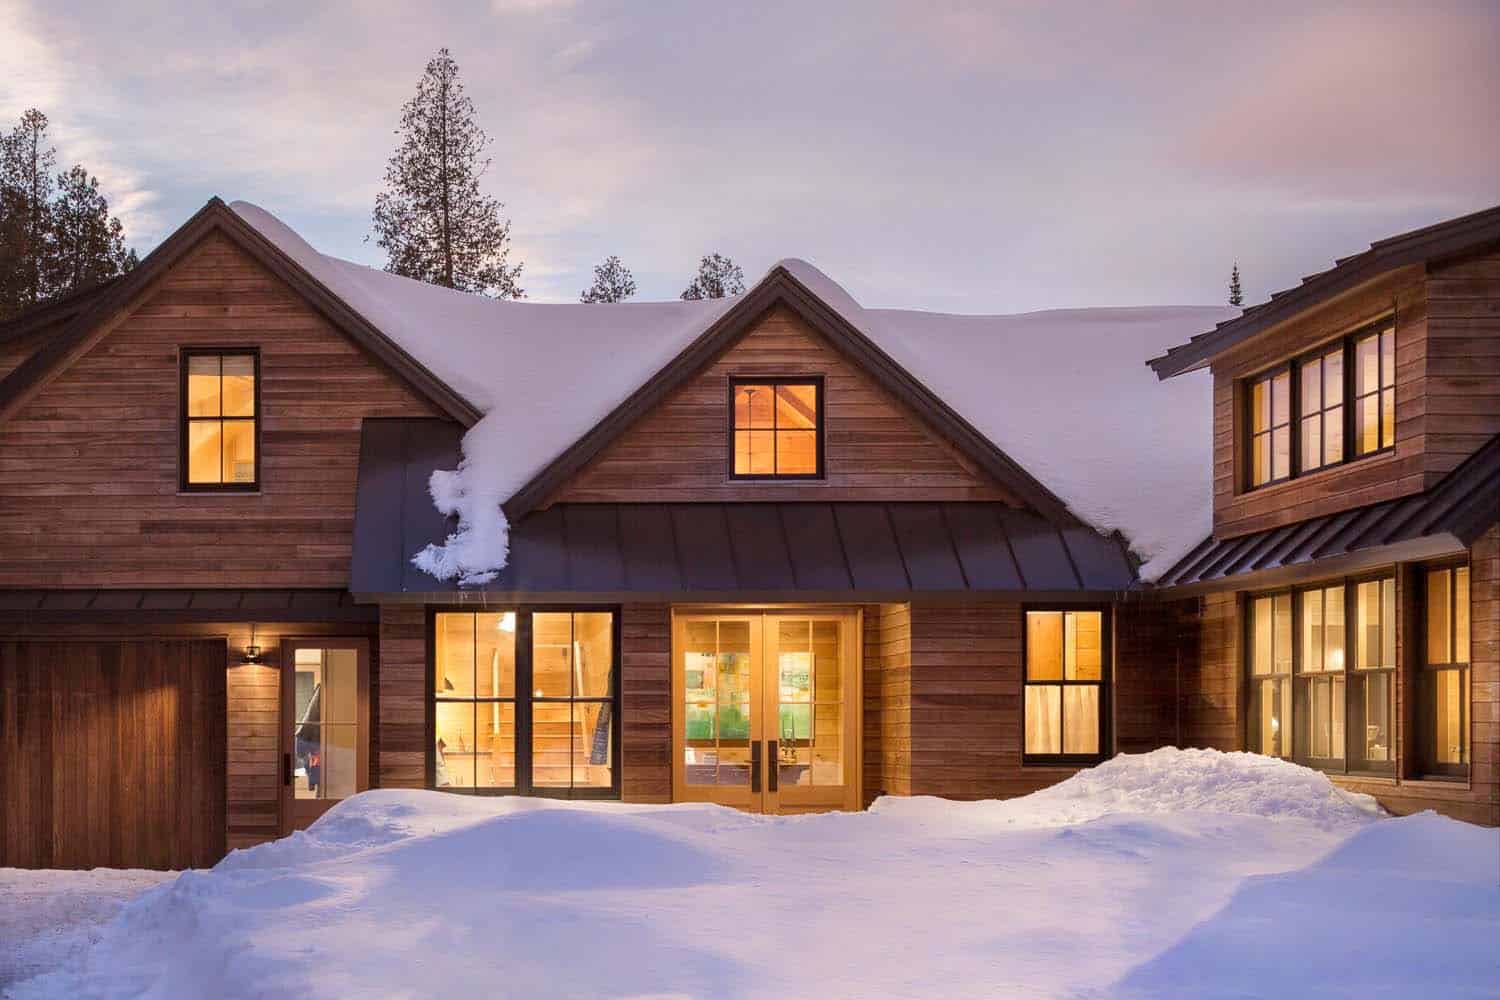 modern rustic mountain home exterior at dusk with snow